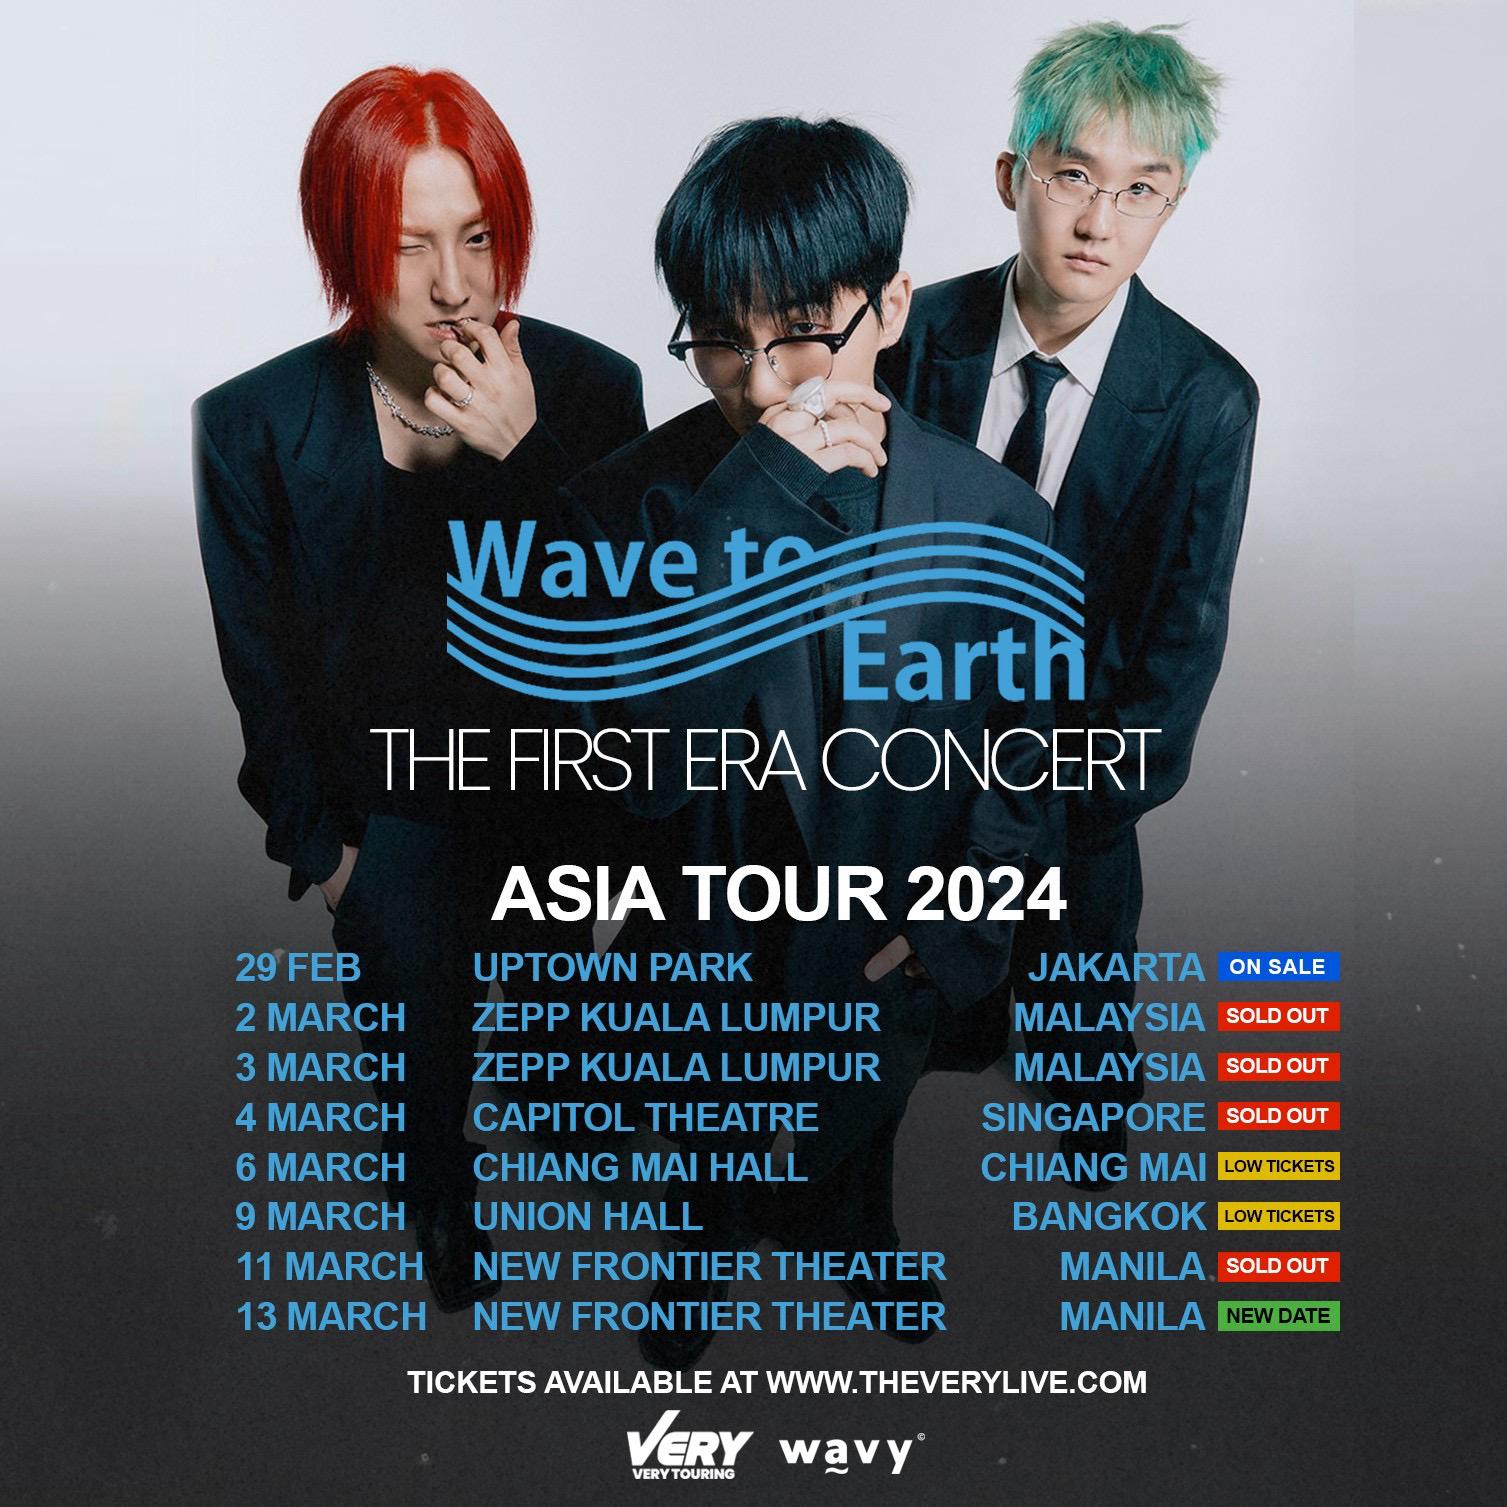 Wave to Earth Rock Jakarta: Storm in February 2024!